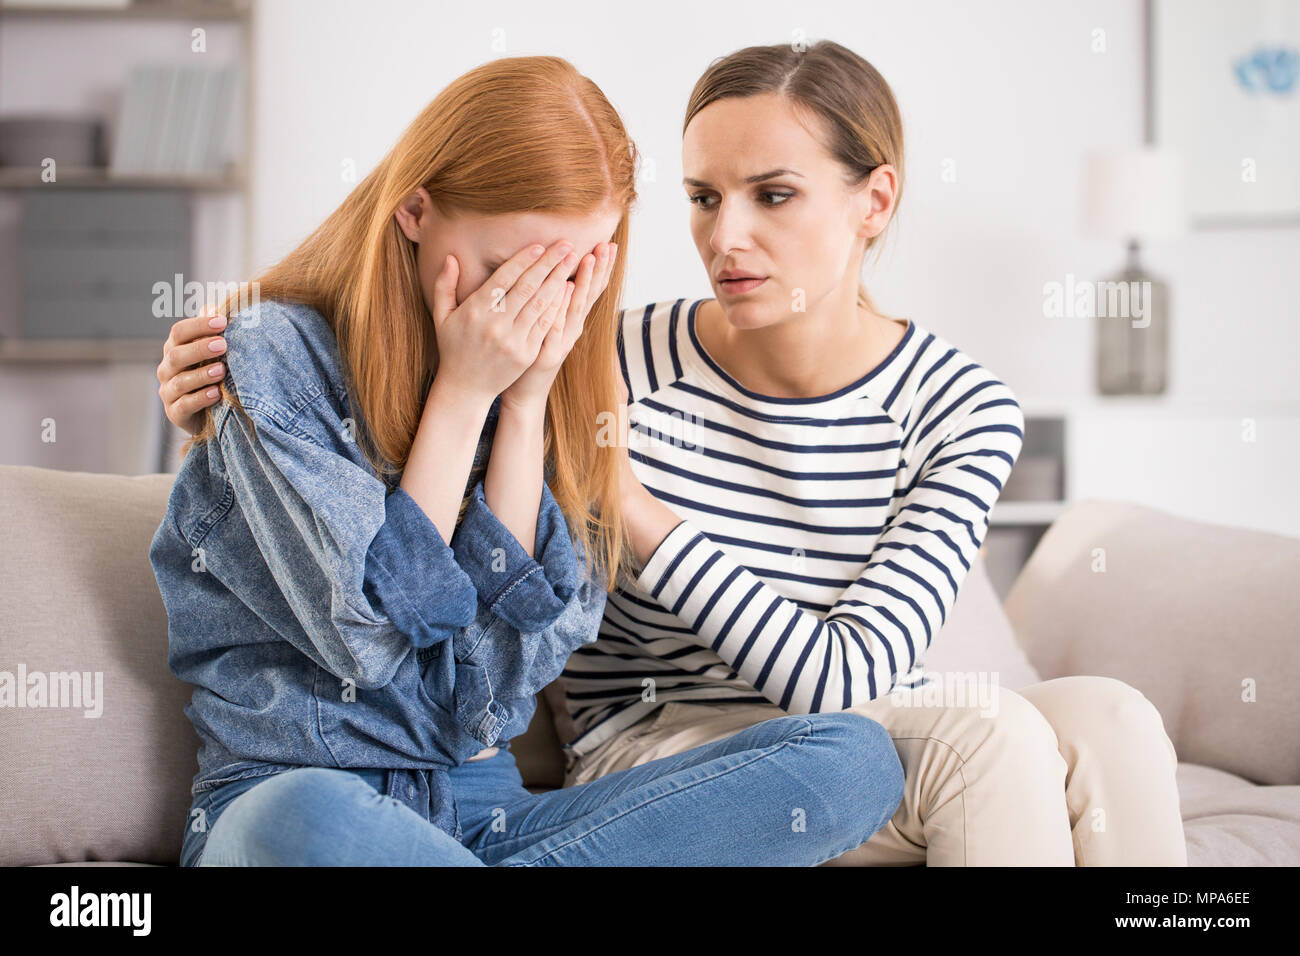 Young depressed woman crying being comforted by friend at home, girl being consoled by sister, mental problem and depression concept Stock Photo